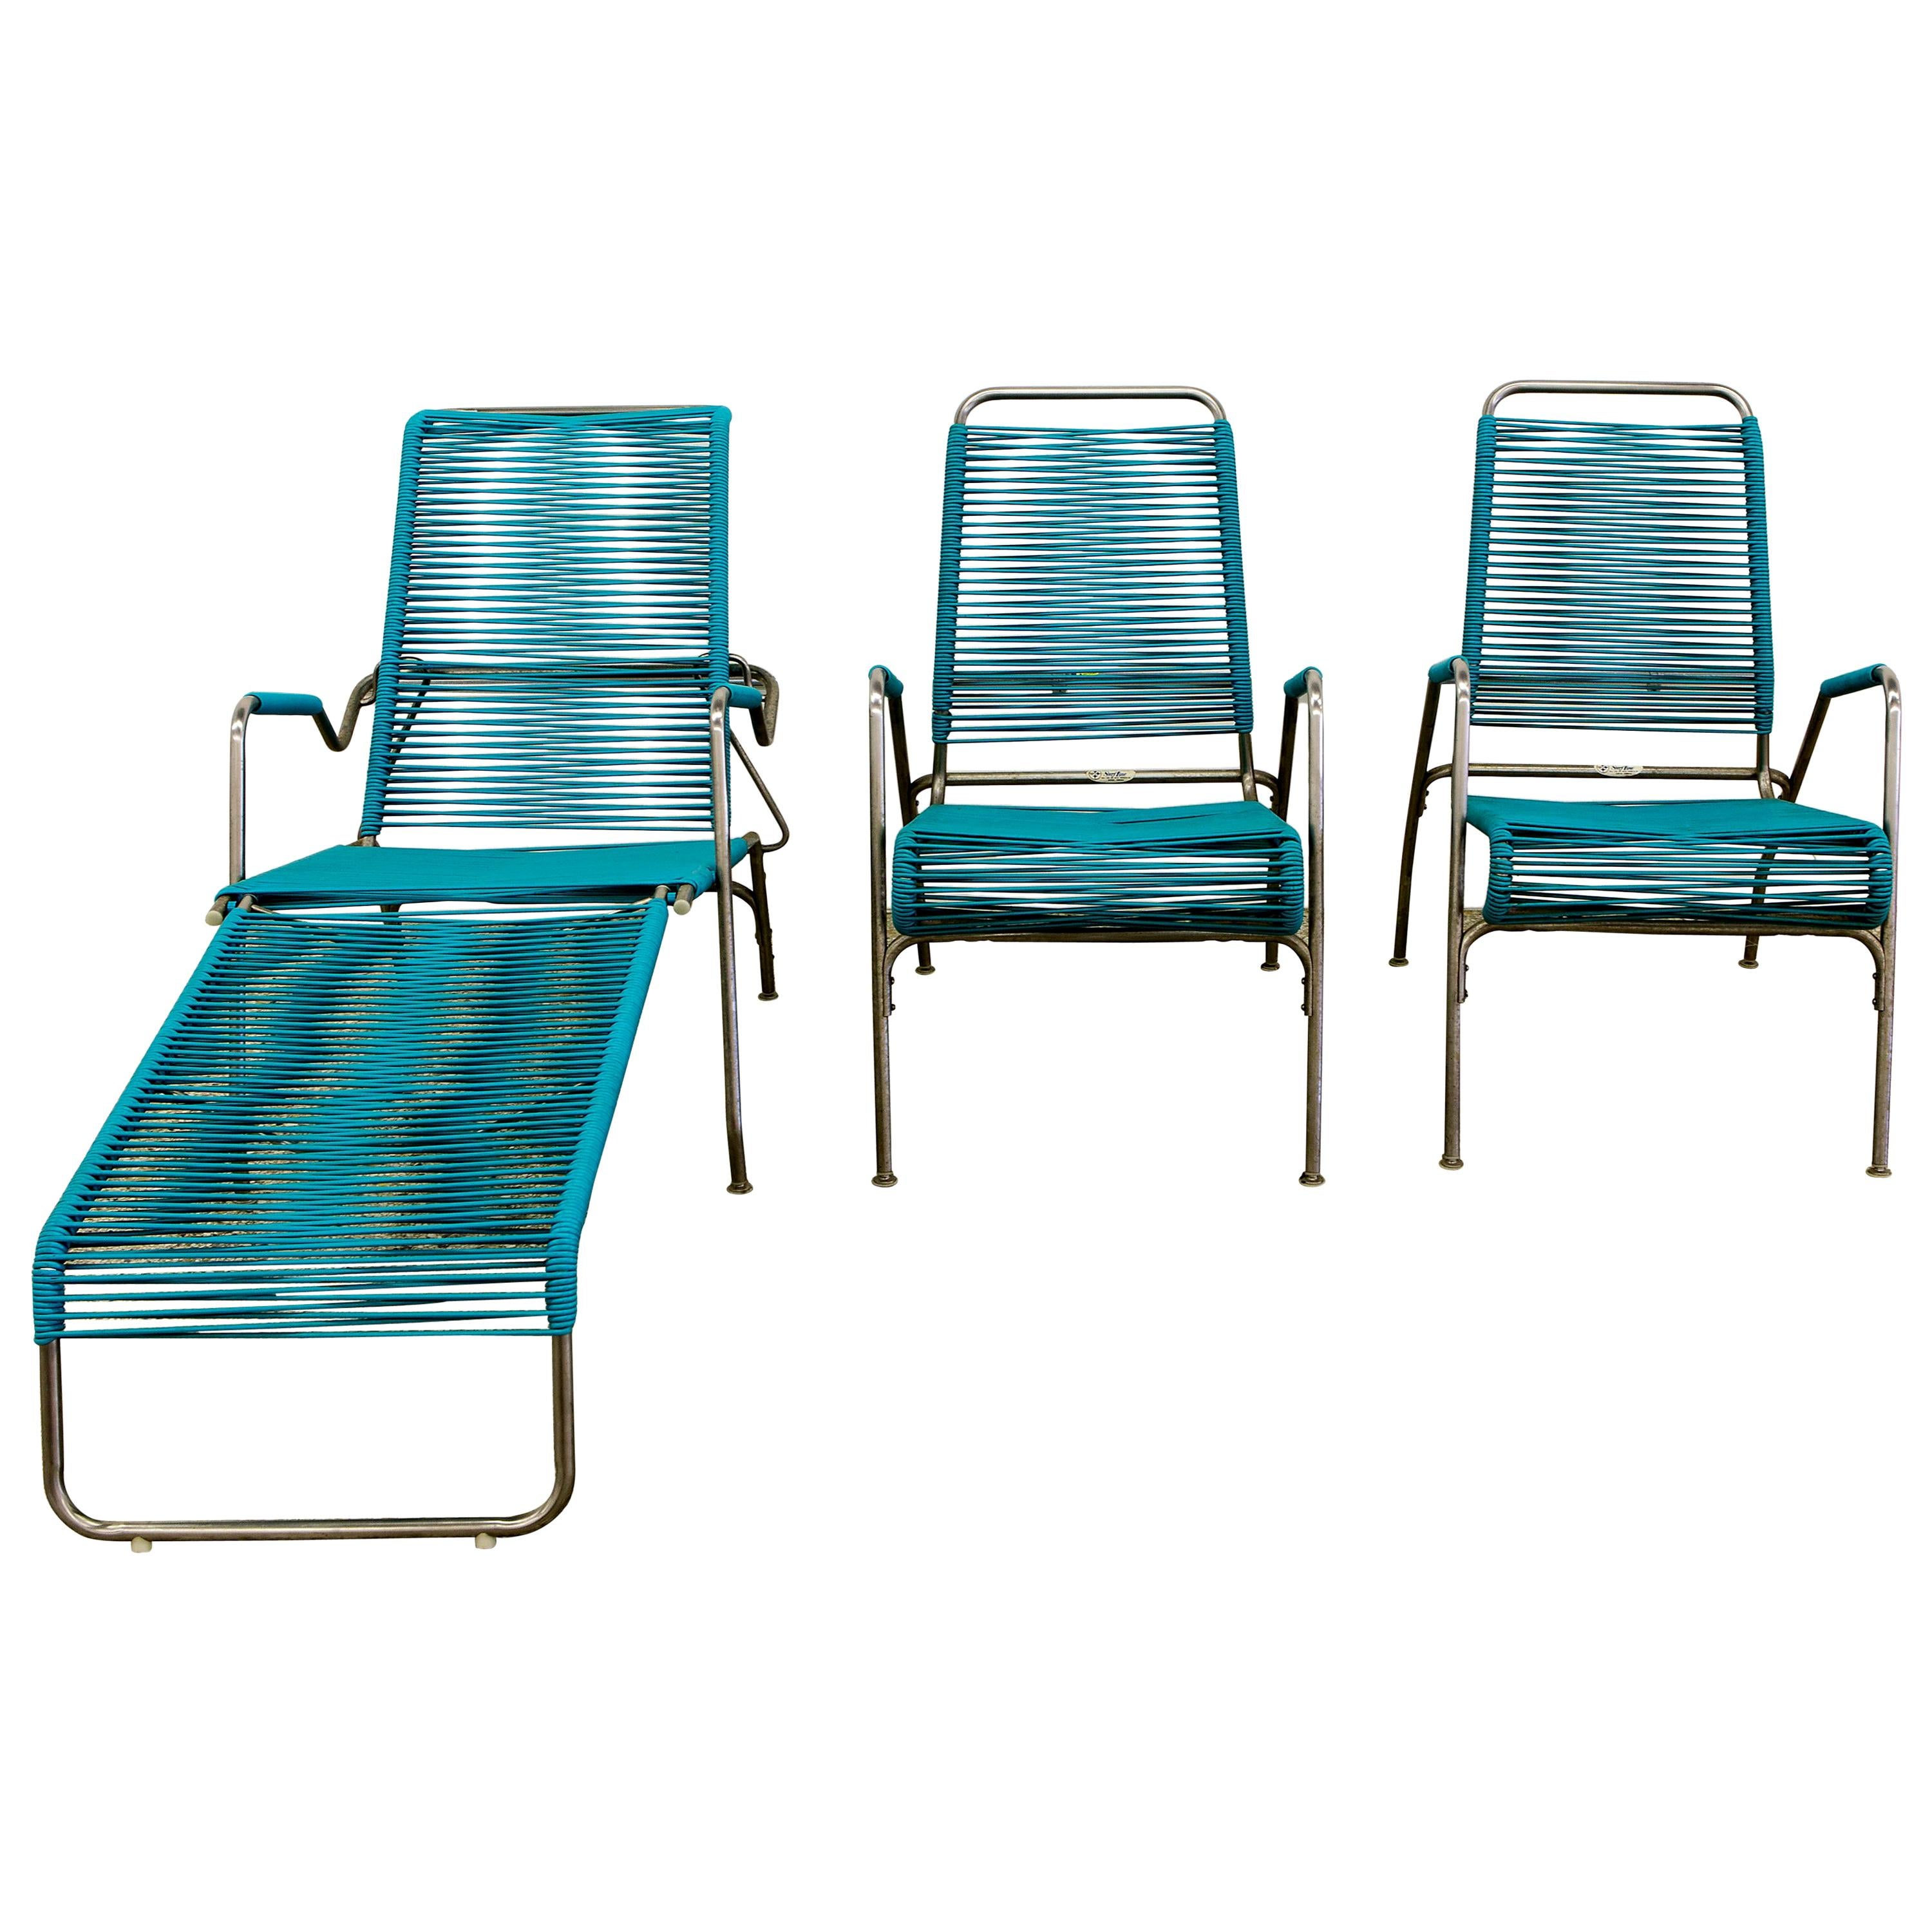 Patio Furniture by Surf Line, 2 Lounge Chairs, 1 Chaise in Stainless and Aqua For Sale